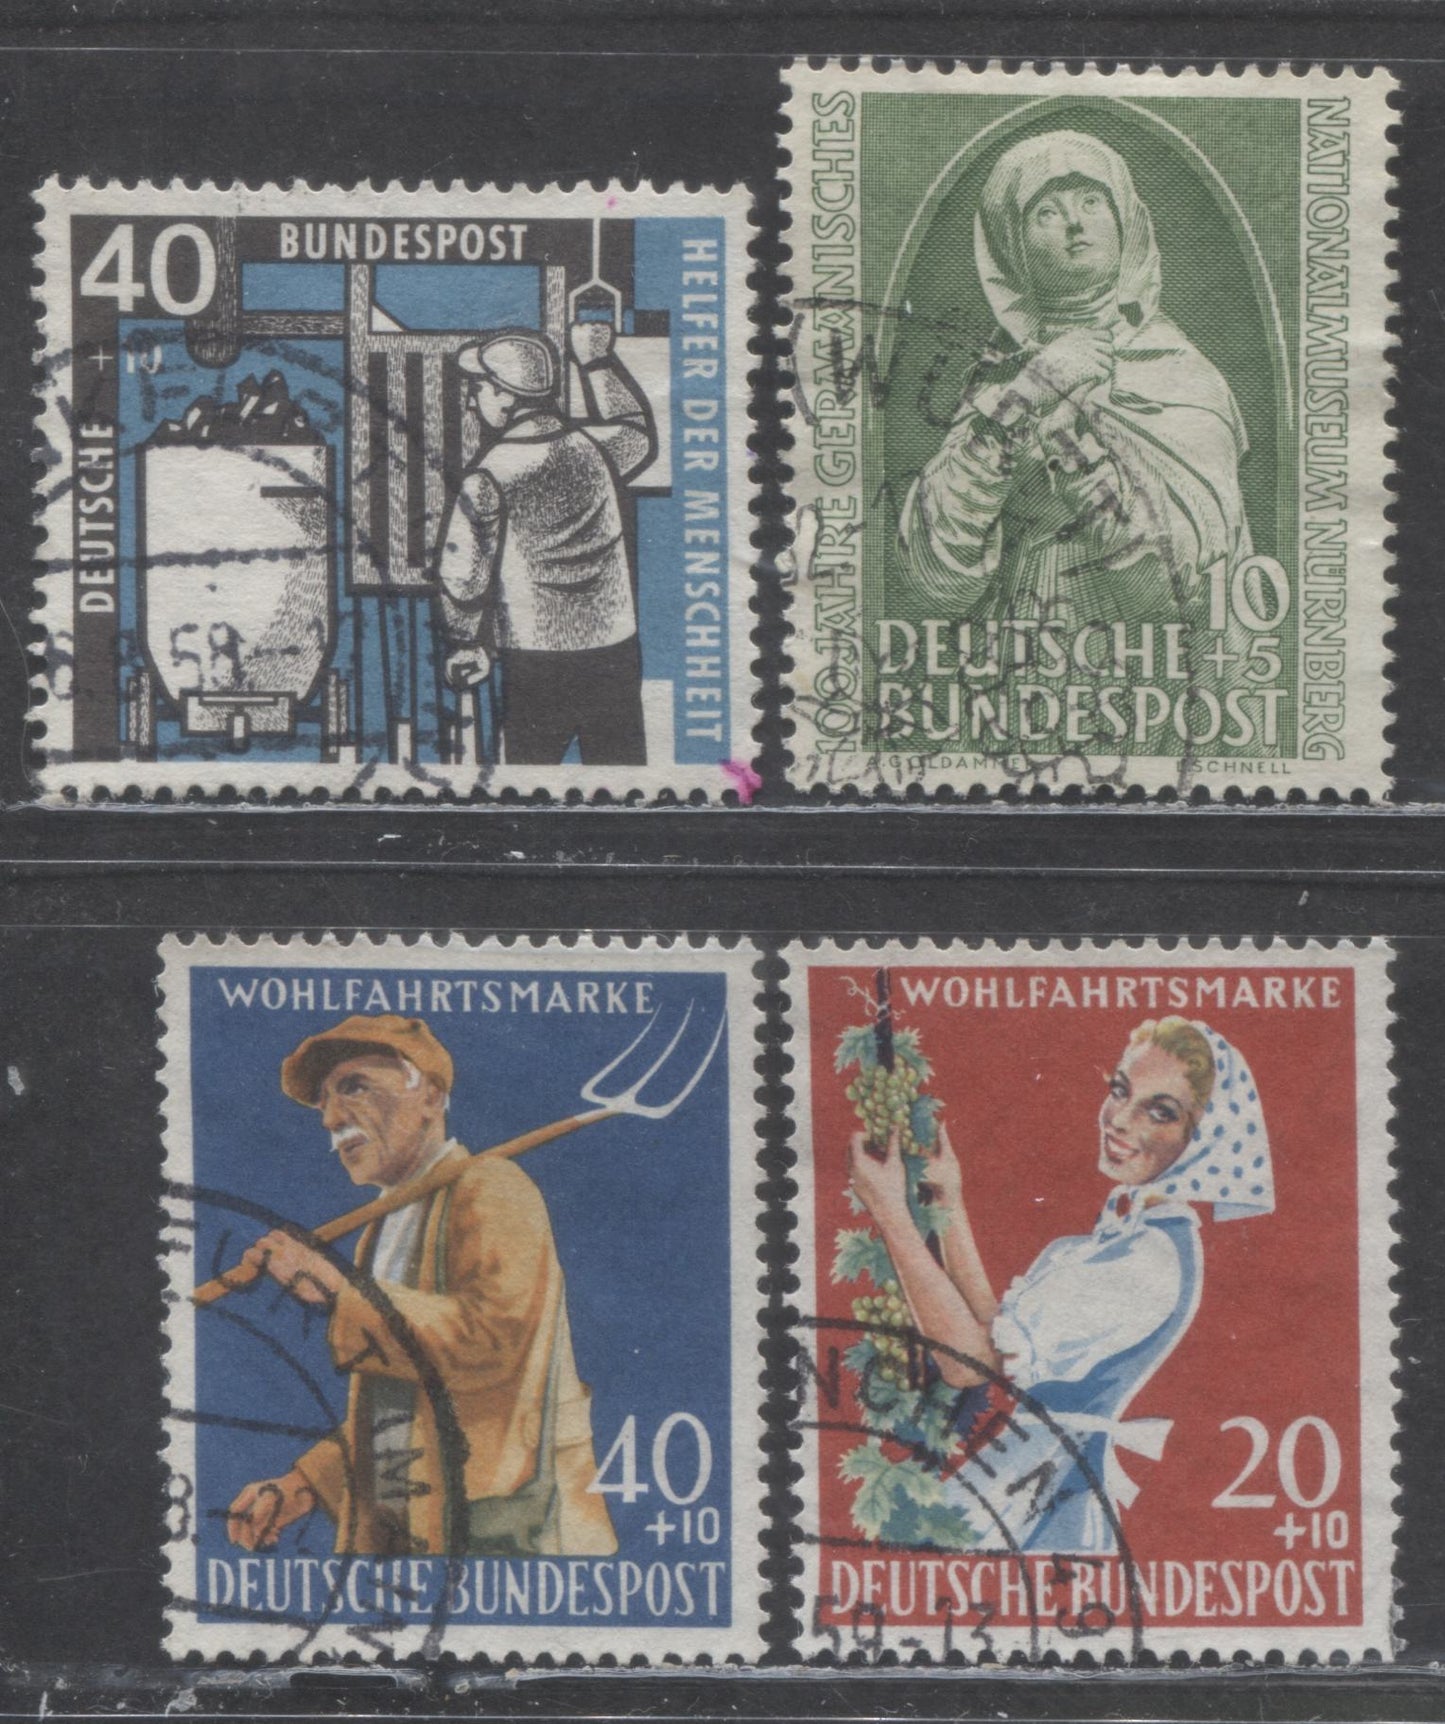 Lot 128 Germany SC#B324/B365 1952-1958 Semi Postals, 4 Fine/Very Fine Used Singles, Click on Listing to See ALL Pictures, 2017 Scott Cat. $41.45 USD